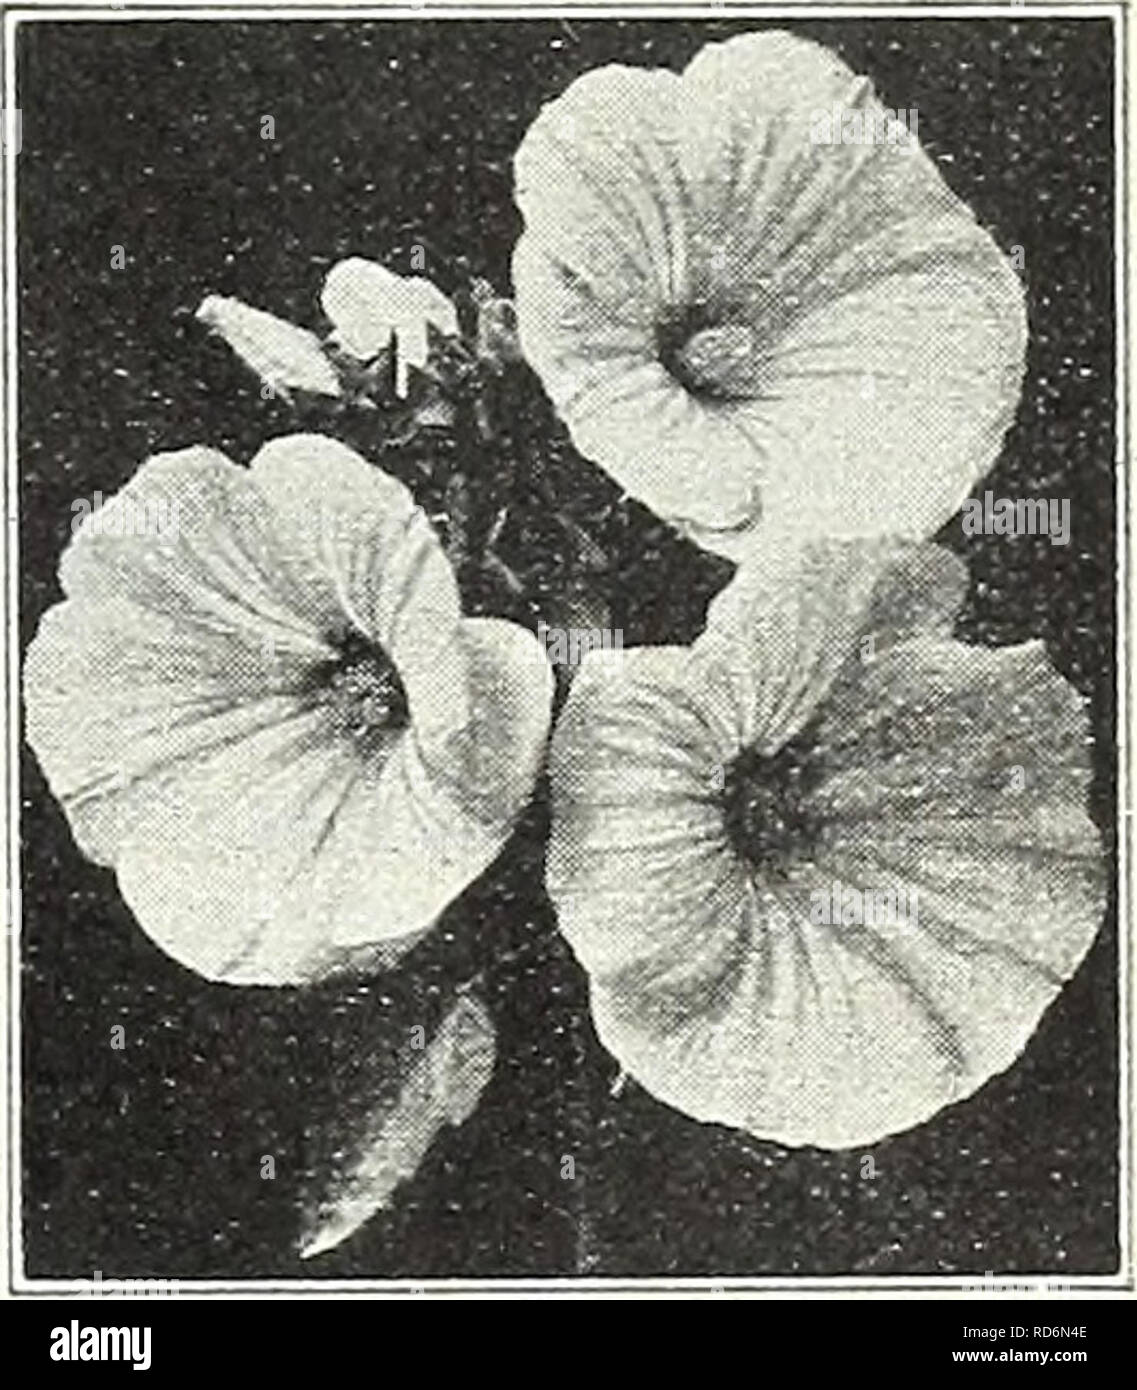 . Currie Bros. : fifty-eighth year 1933. Flowers Seeds Catalogs; Bulbs (Plants) Seeds Catalogs; Vegetables Seeds Catalogs; Nurseries (Horticulture) Catalogs; Plants, Ornamental Catalogs; Gardening Equipment and supplies Catalogs. LINUM (Flax) Free-Flowering, Pretty Plants Grandiilorum Coccineutn—A beautiful dwarf annual, with crimson flowers. Pkt. 10c PERENNIAL LINUM (See page 49) LEPTOSIPHON Free flowering dwarf hardy annuals bearing bright flowers profusely in many colors, suitable for edging or rock work. Finest Mixed Pkt. 10c LOPHOSPERMUM SCANDENS—A beautiful climbing an- nual with rosy-pu Stock Photo